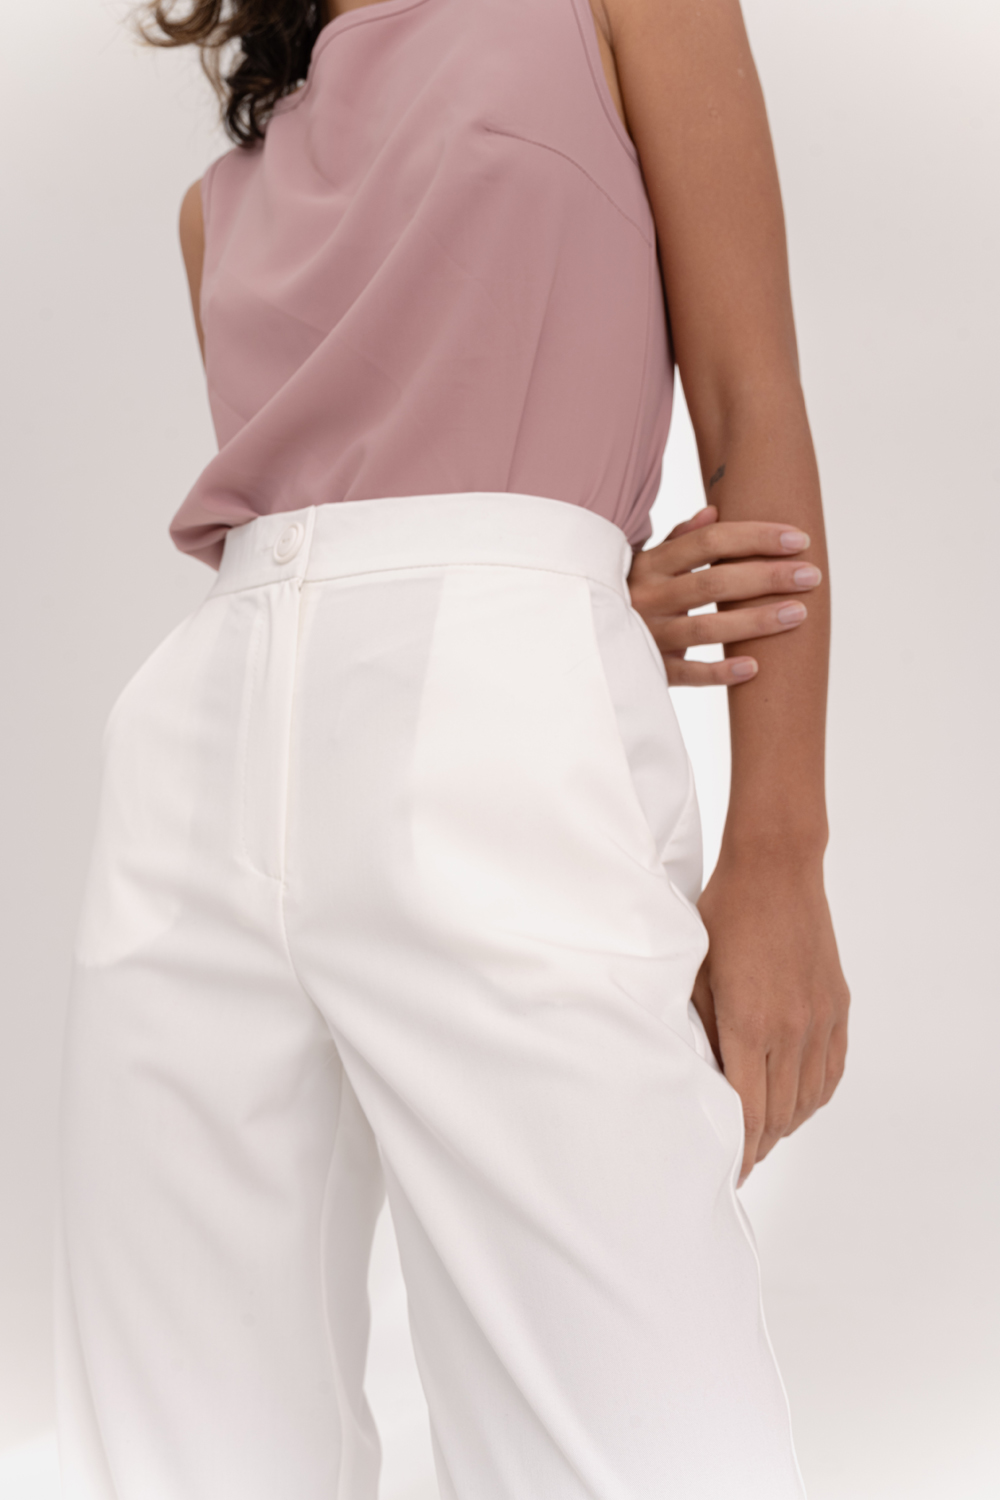 Milk trousers with an elasticated waistband and pleats at the bottom